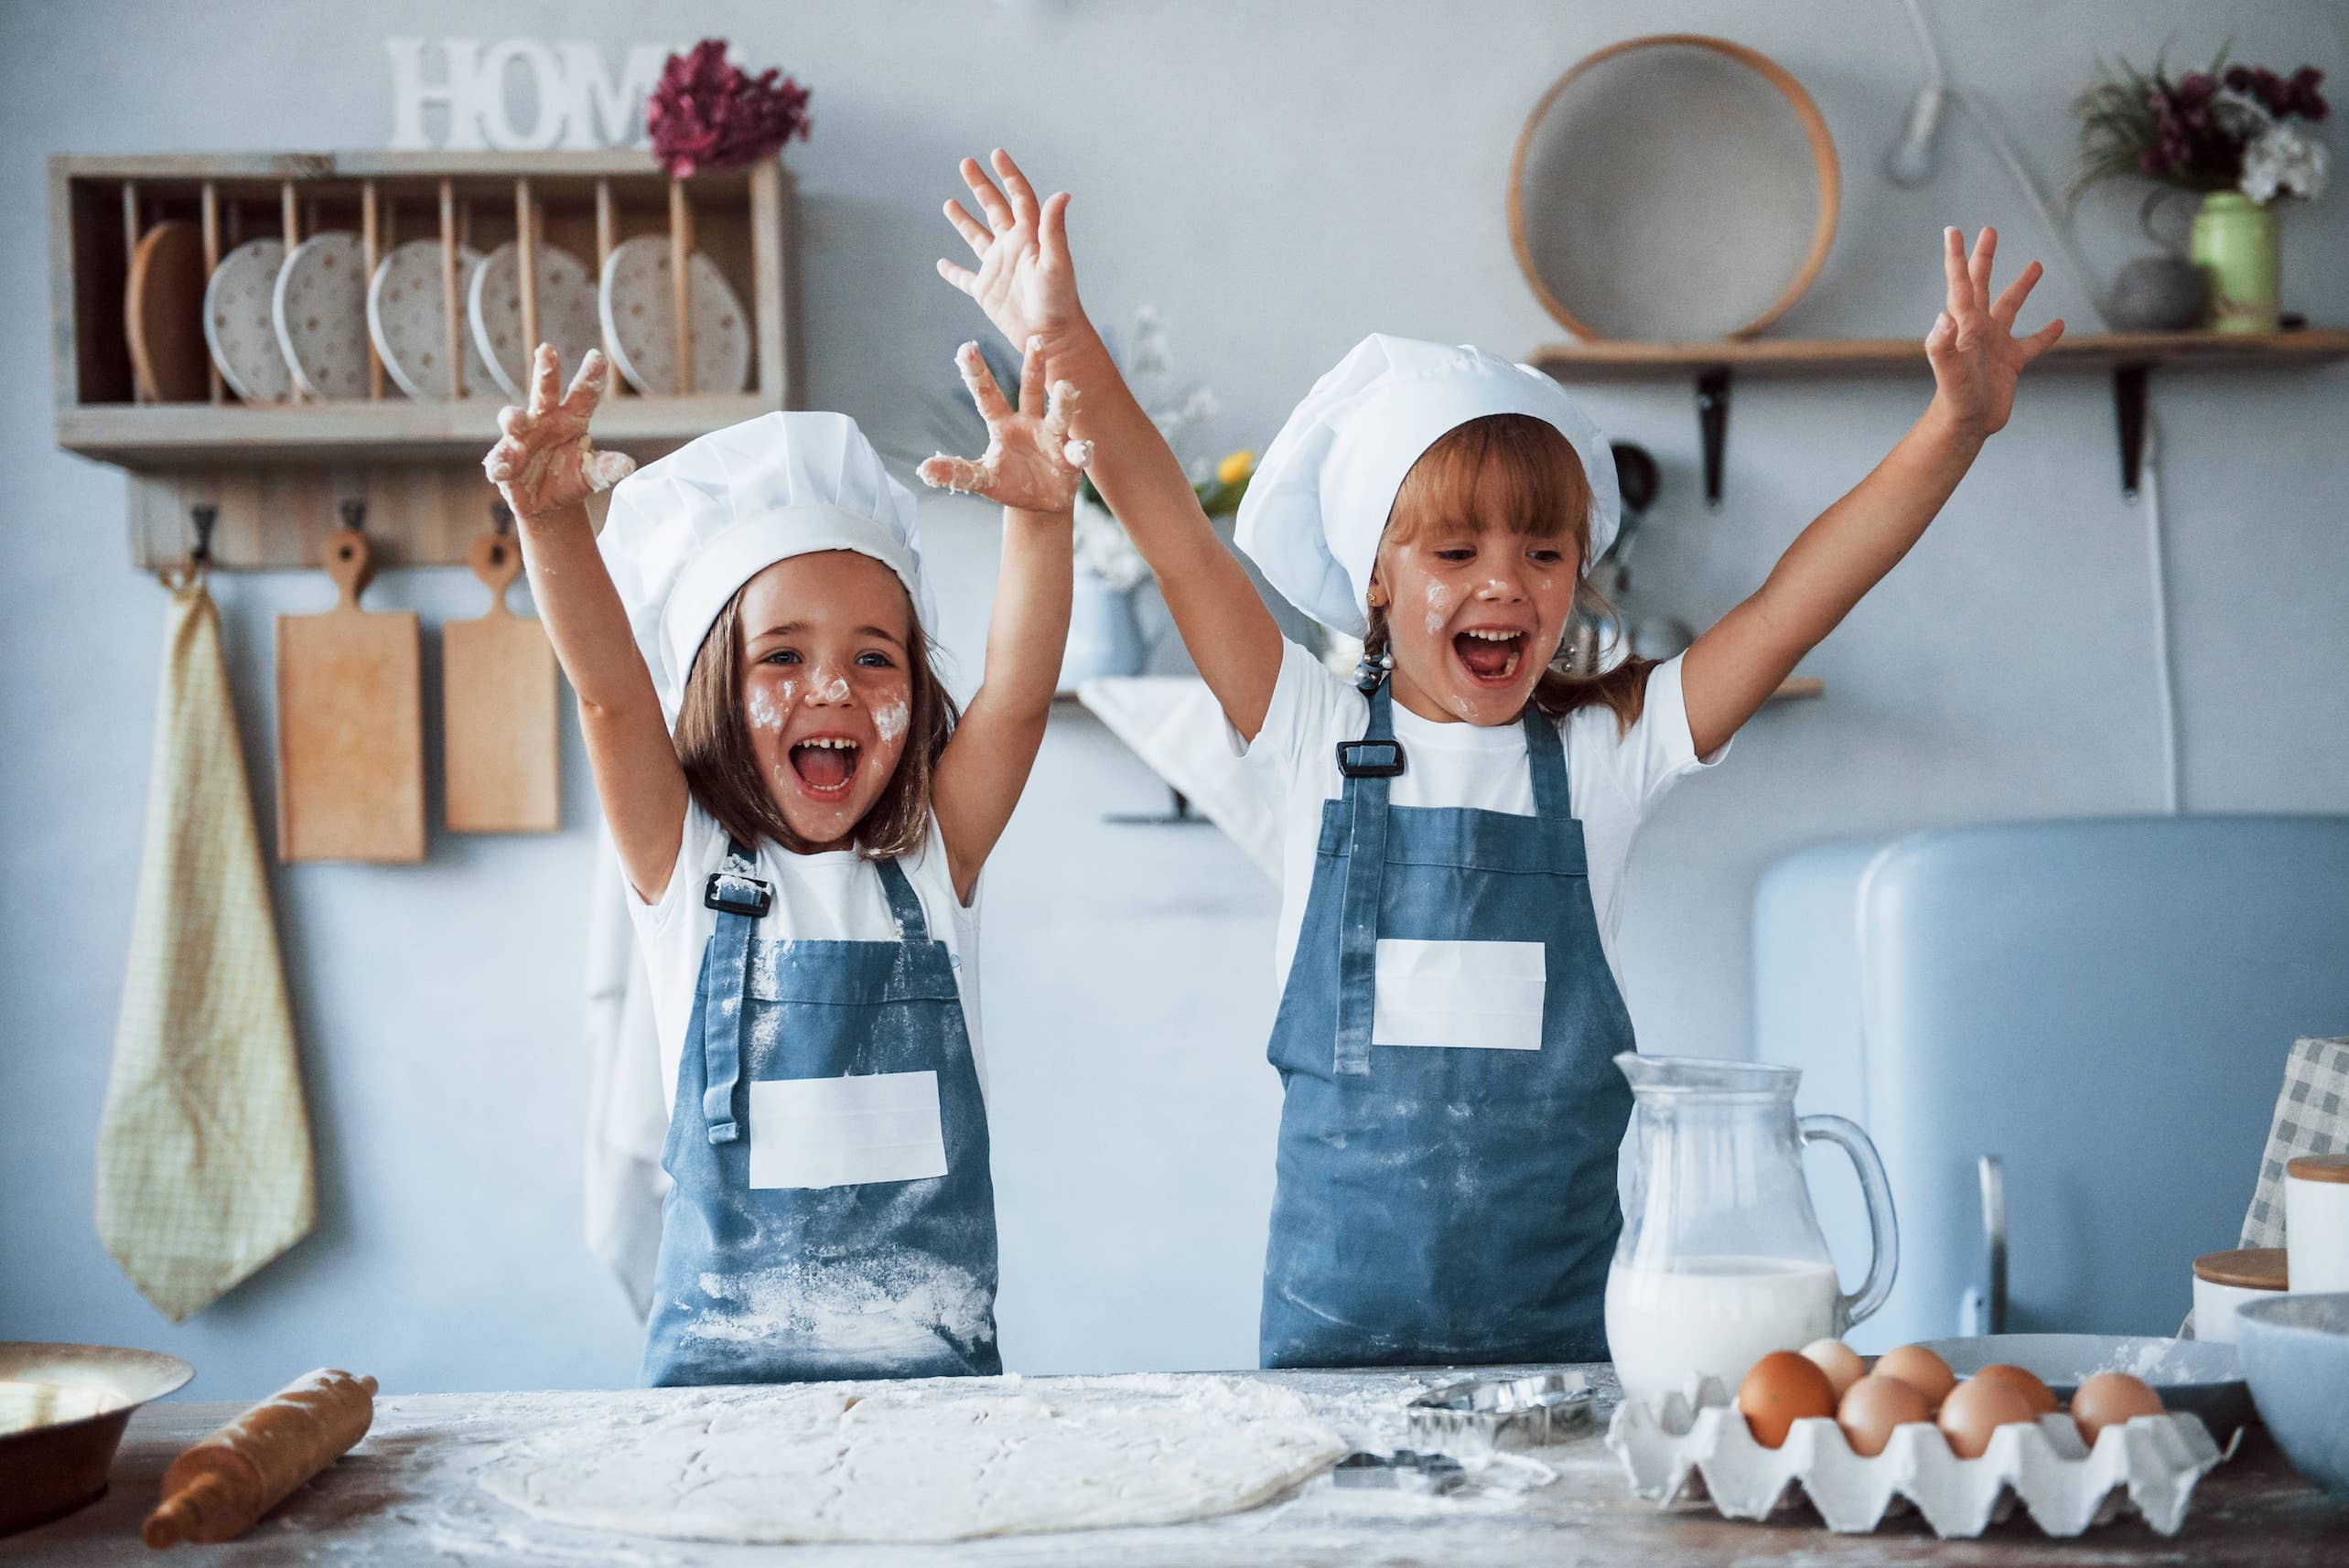 Two sisters baking in the kitchen with baker's hats and flour on their faces.